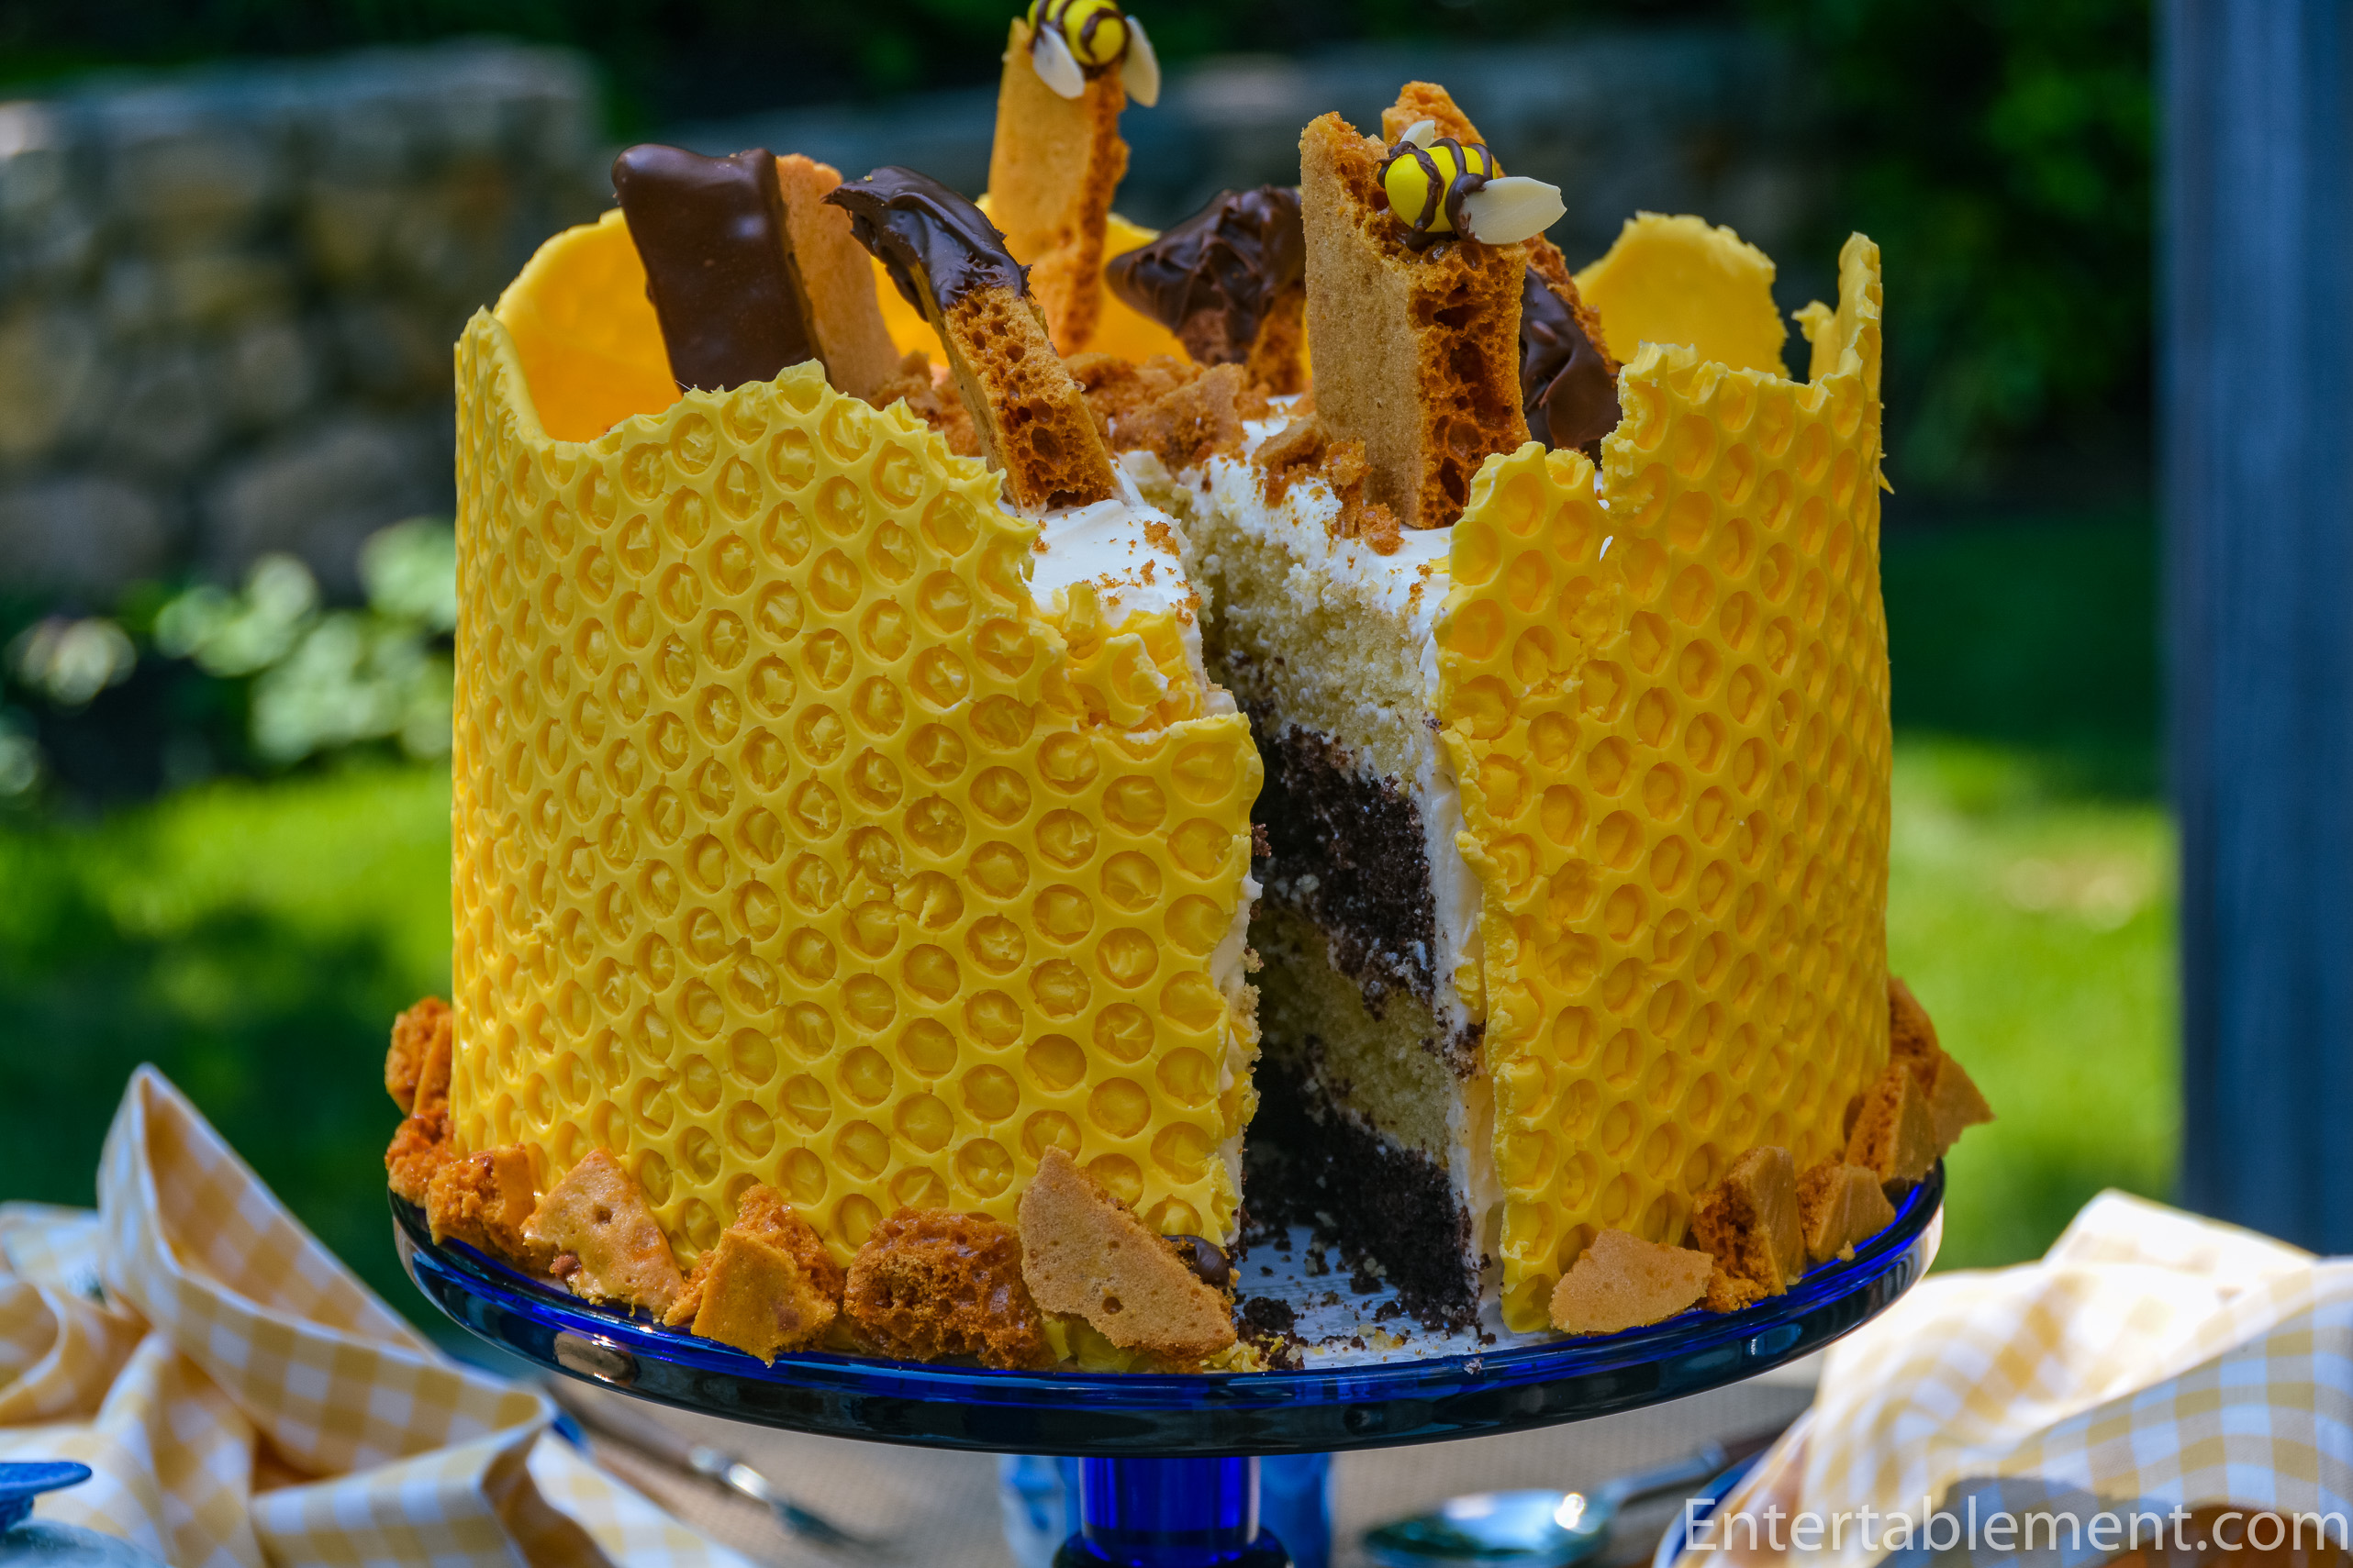 Honeycomb Cakes – Give.them.beauty